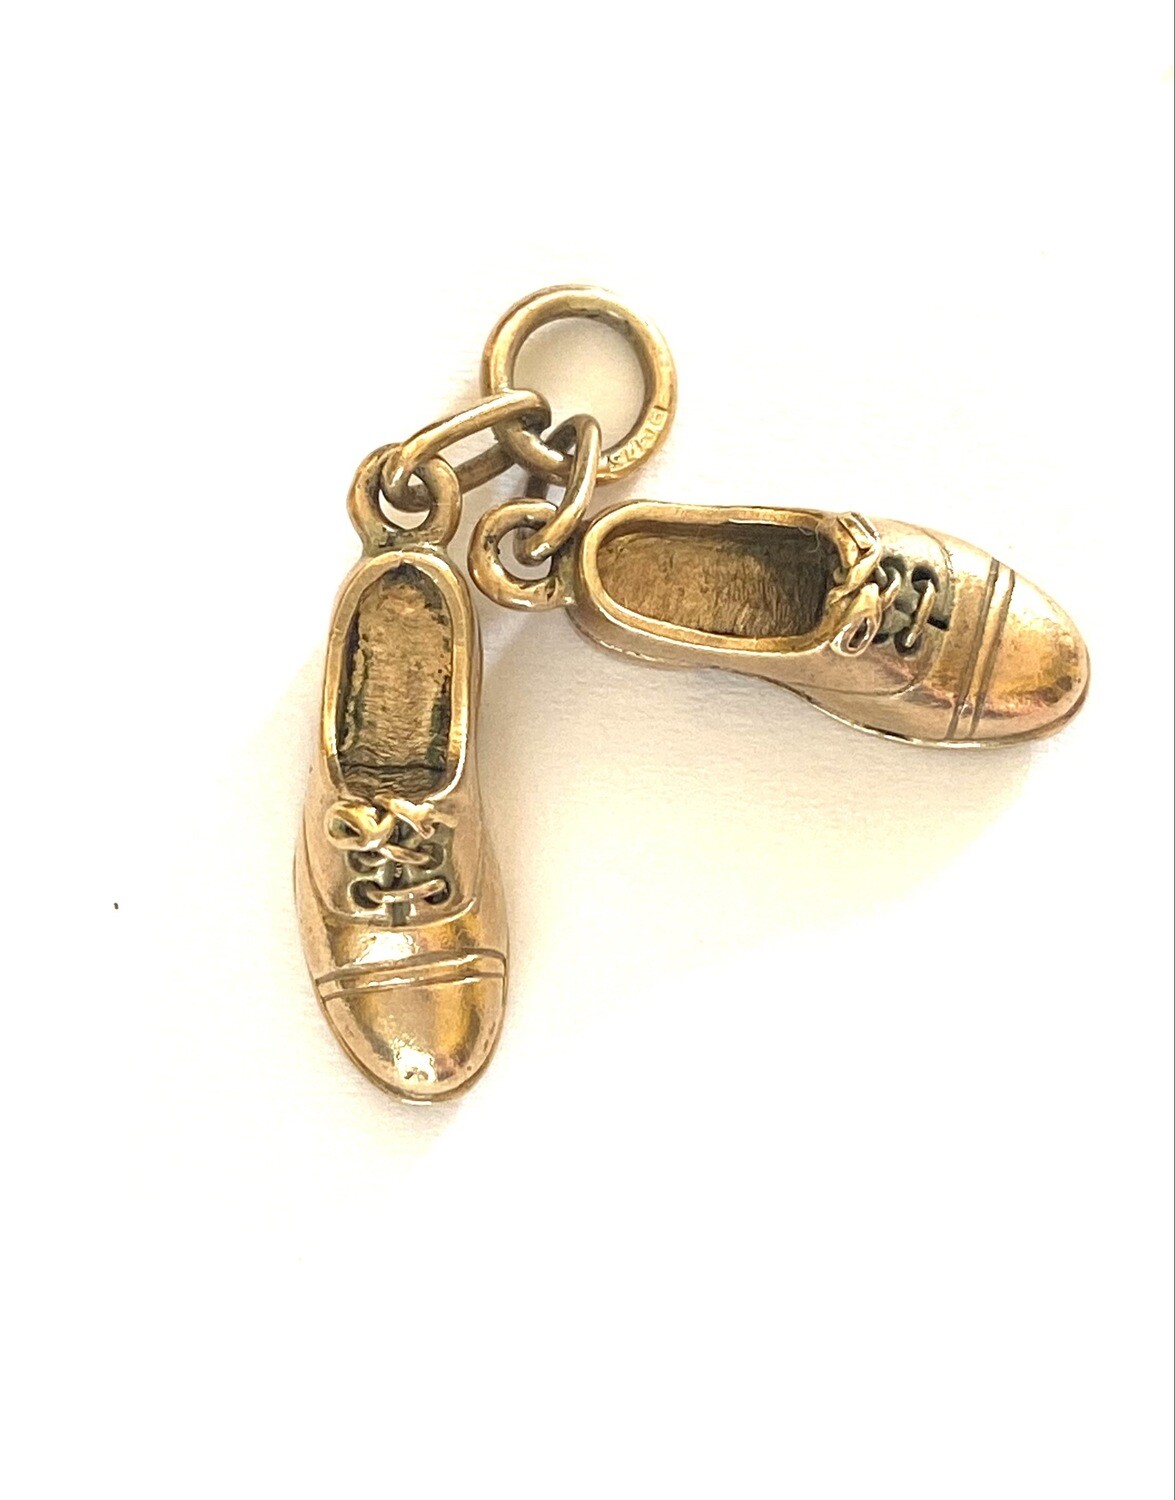 9ct vintage shoes charm / brogues circa chester 1959